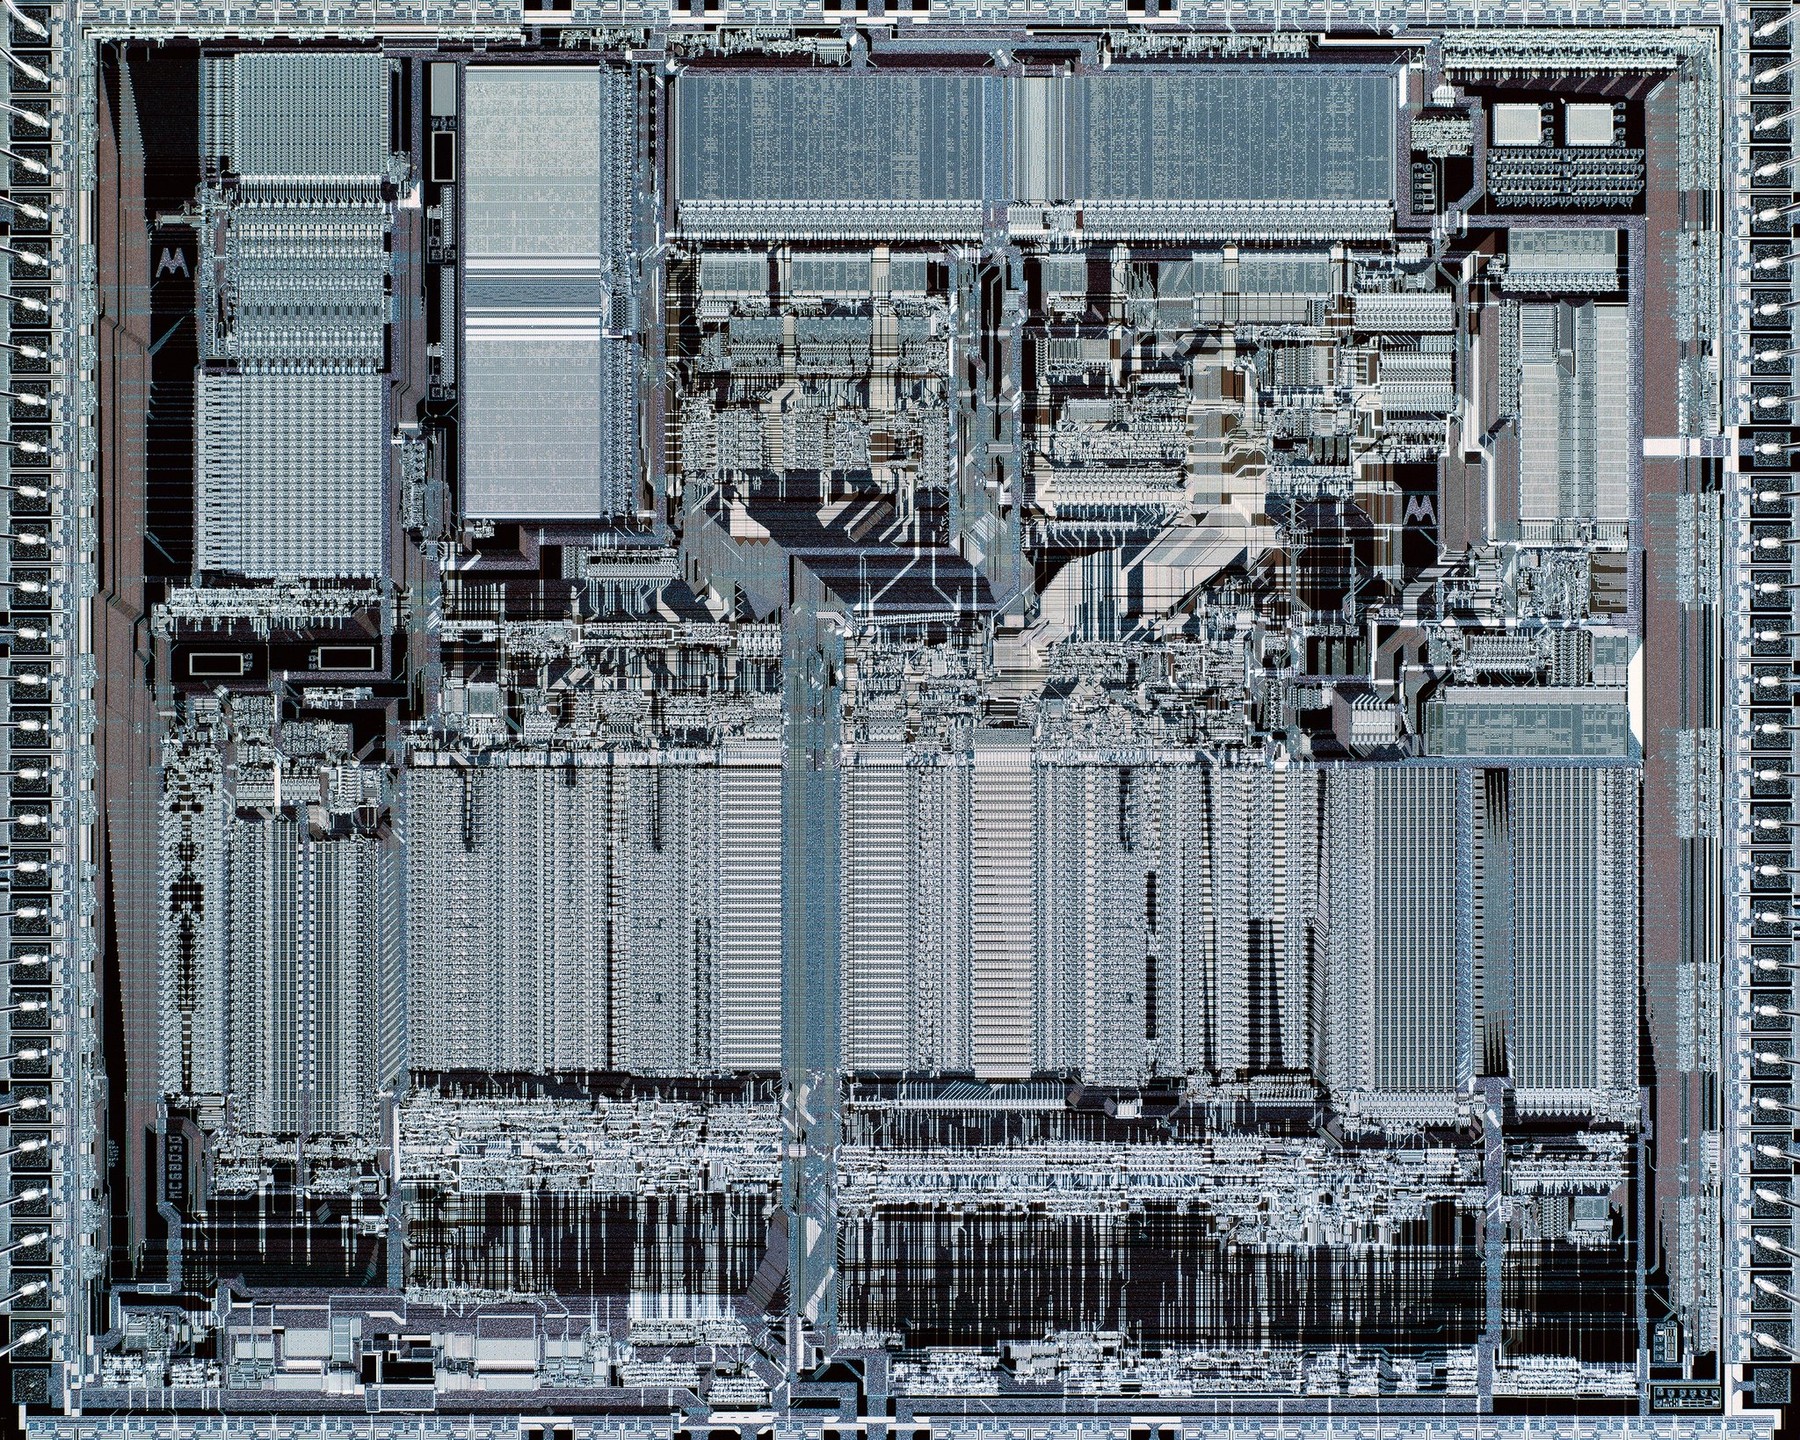 wild close-ups of computer chips look like intricate cities 